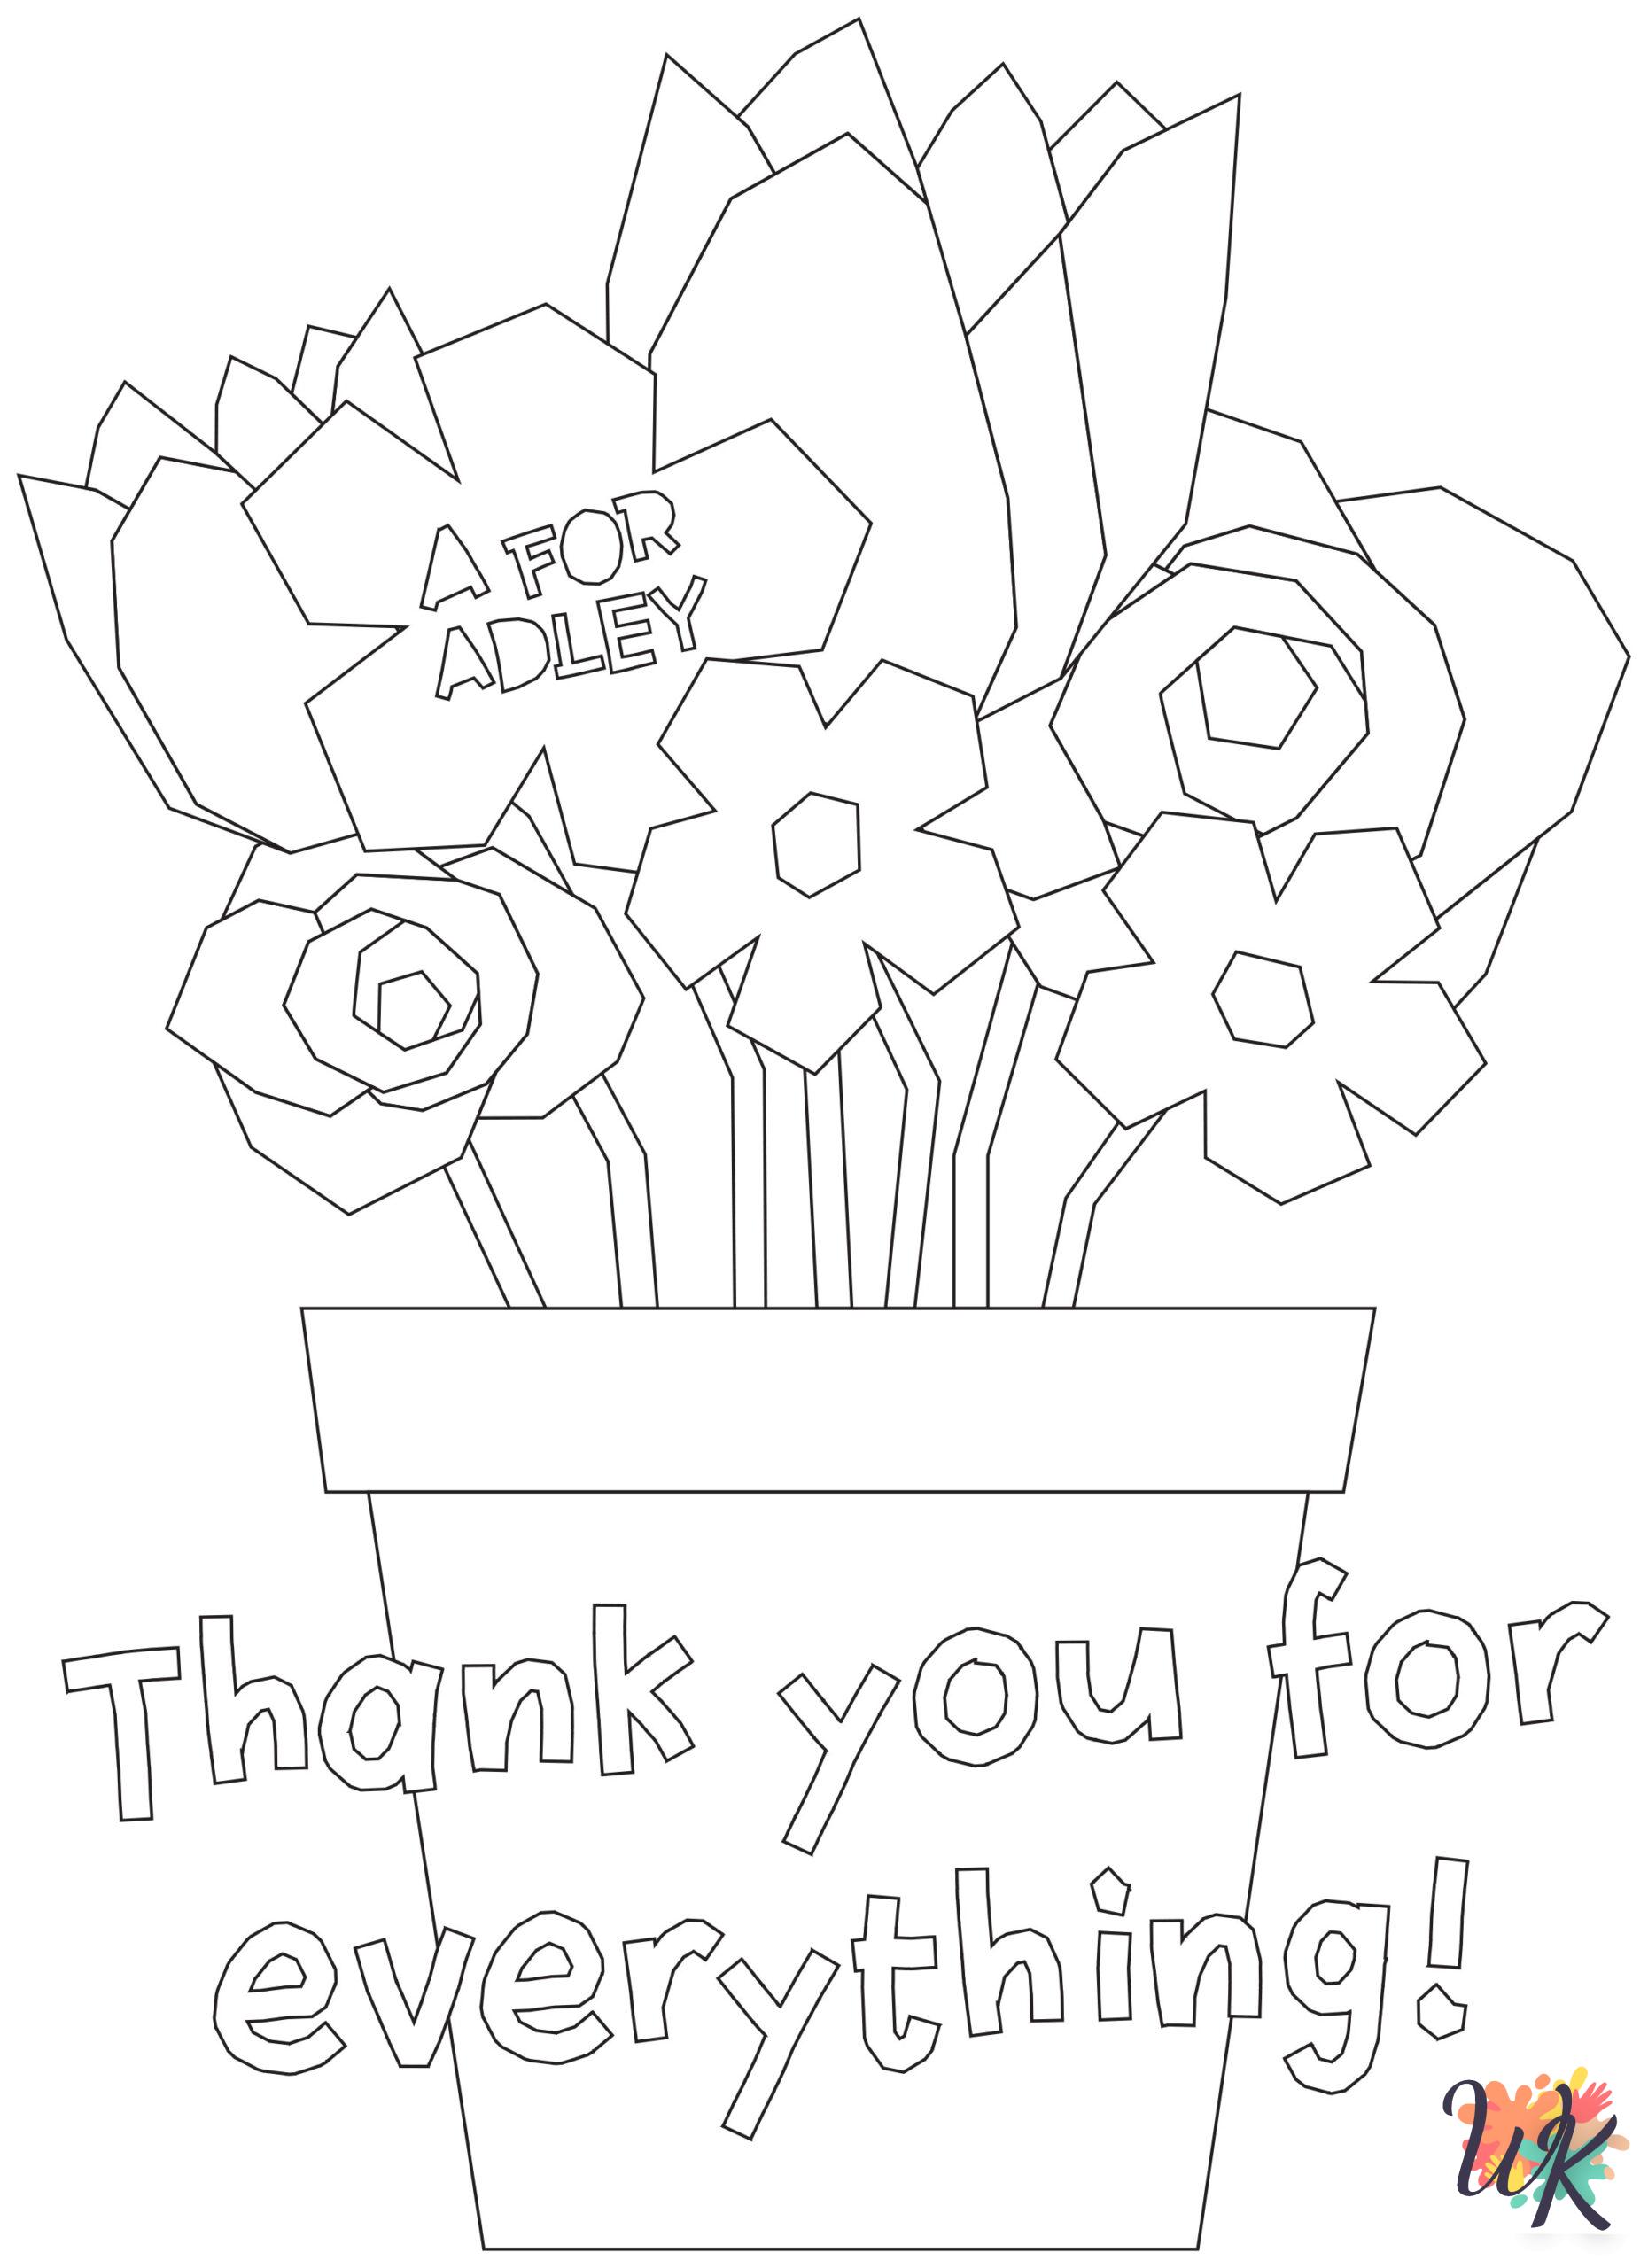 free A For Adley coloring pages